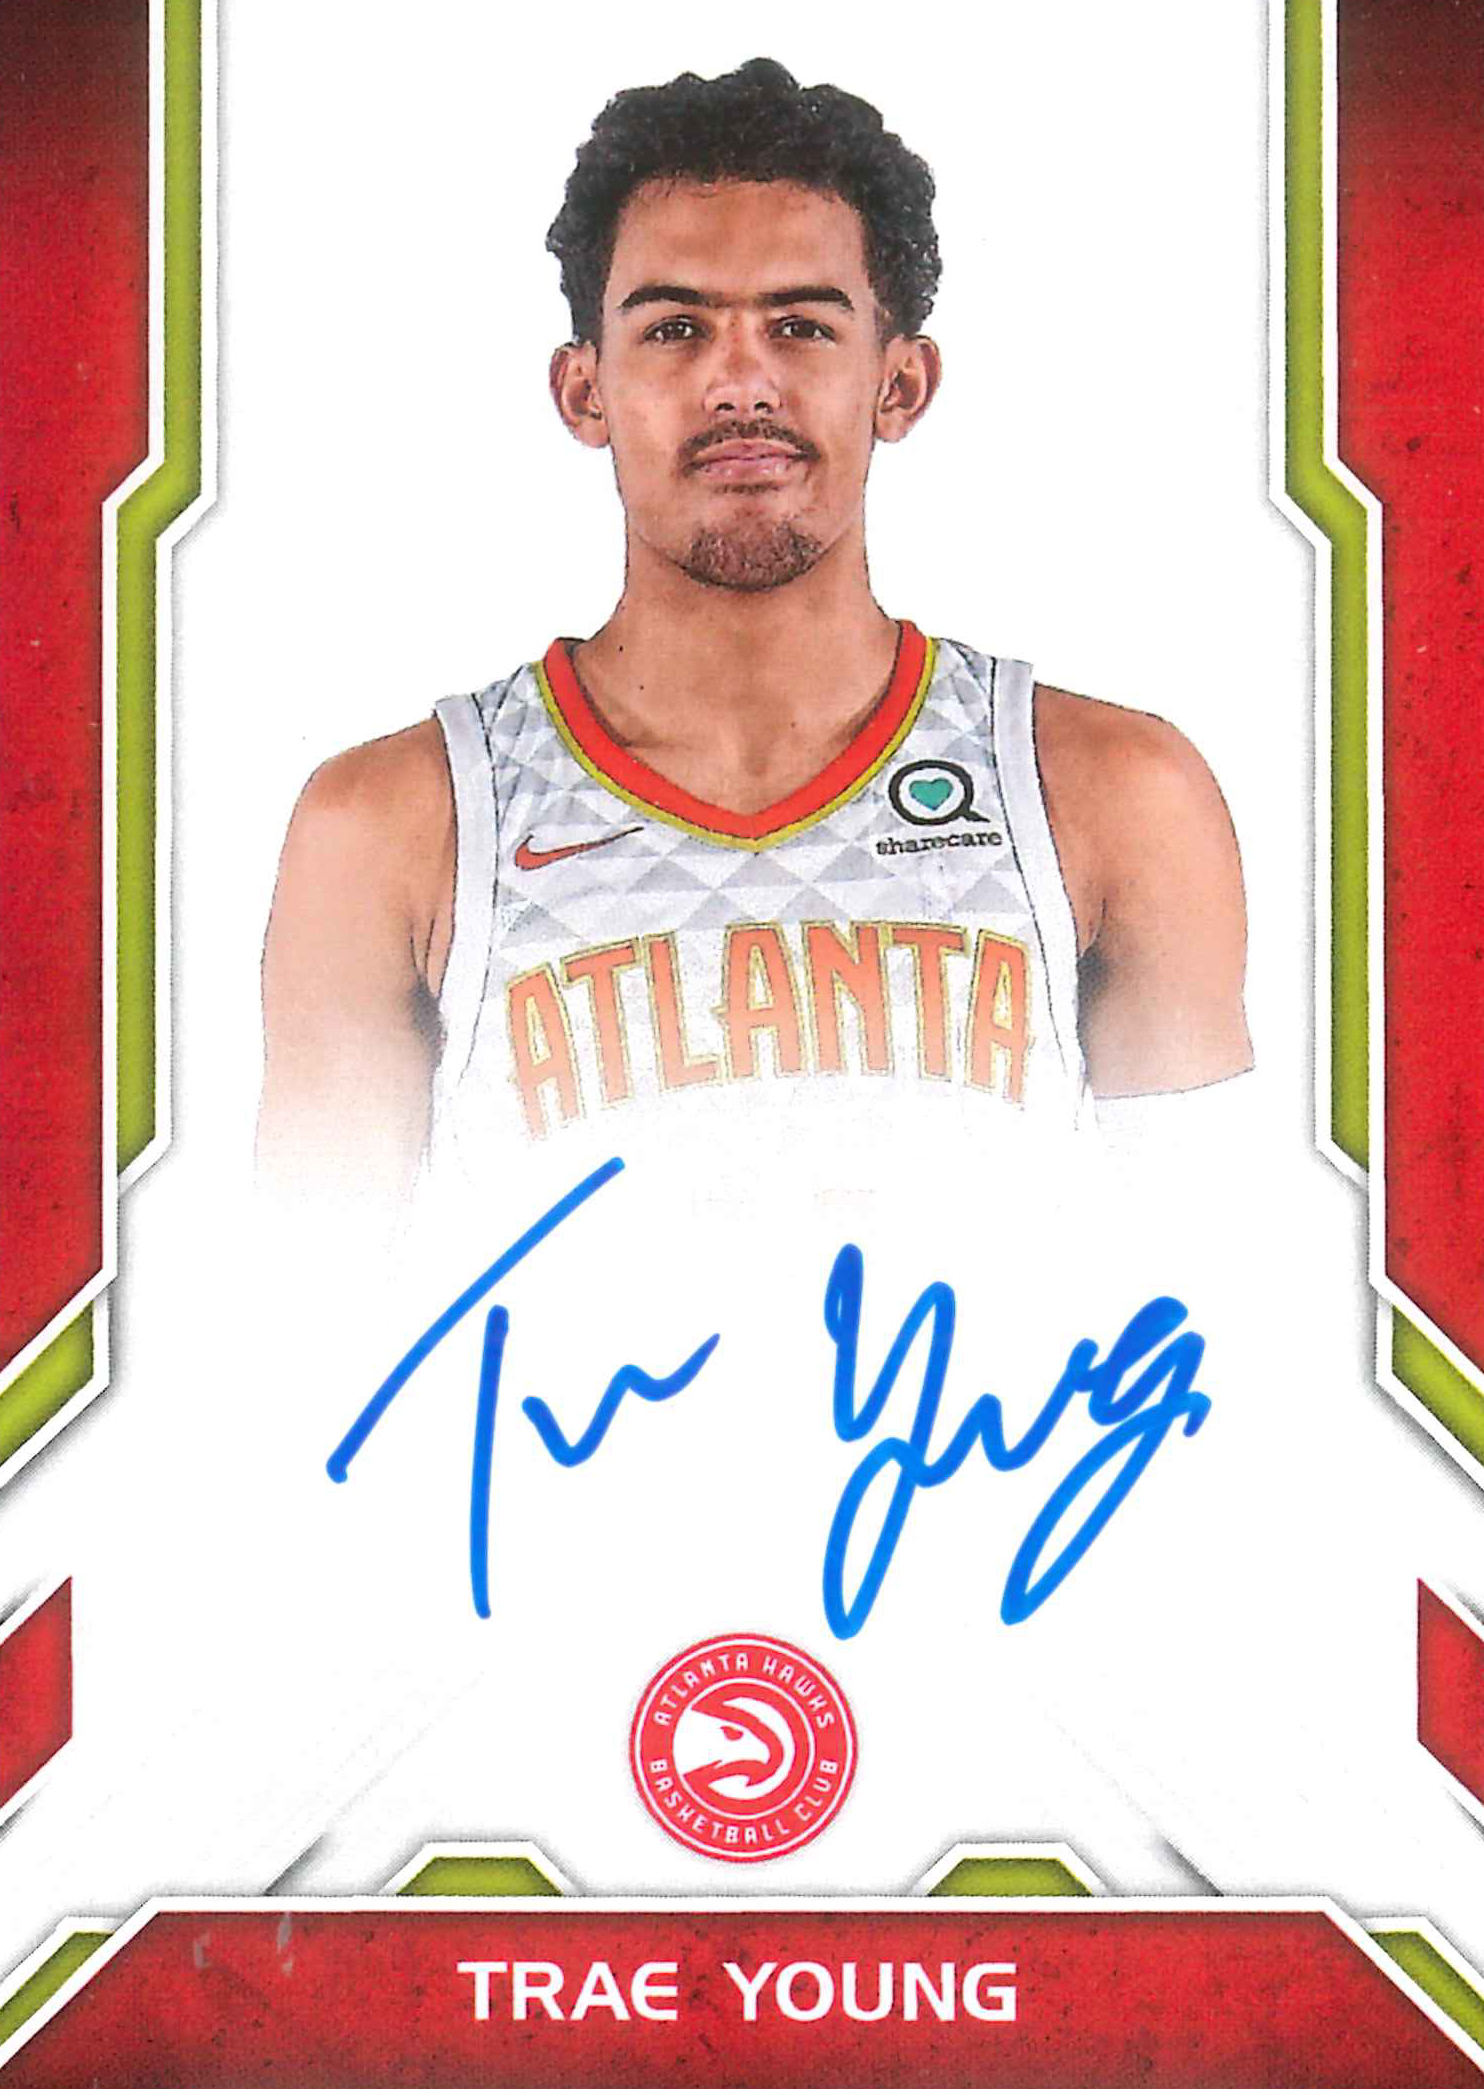 trae young signed jersey